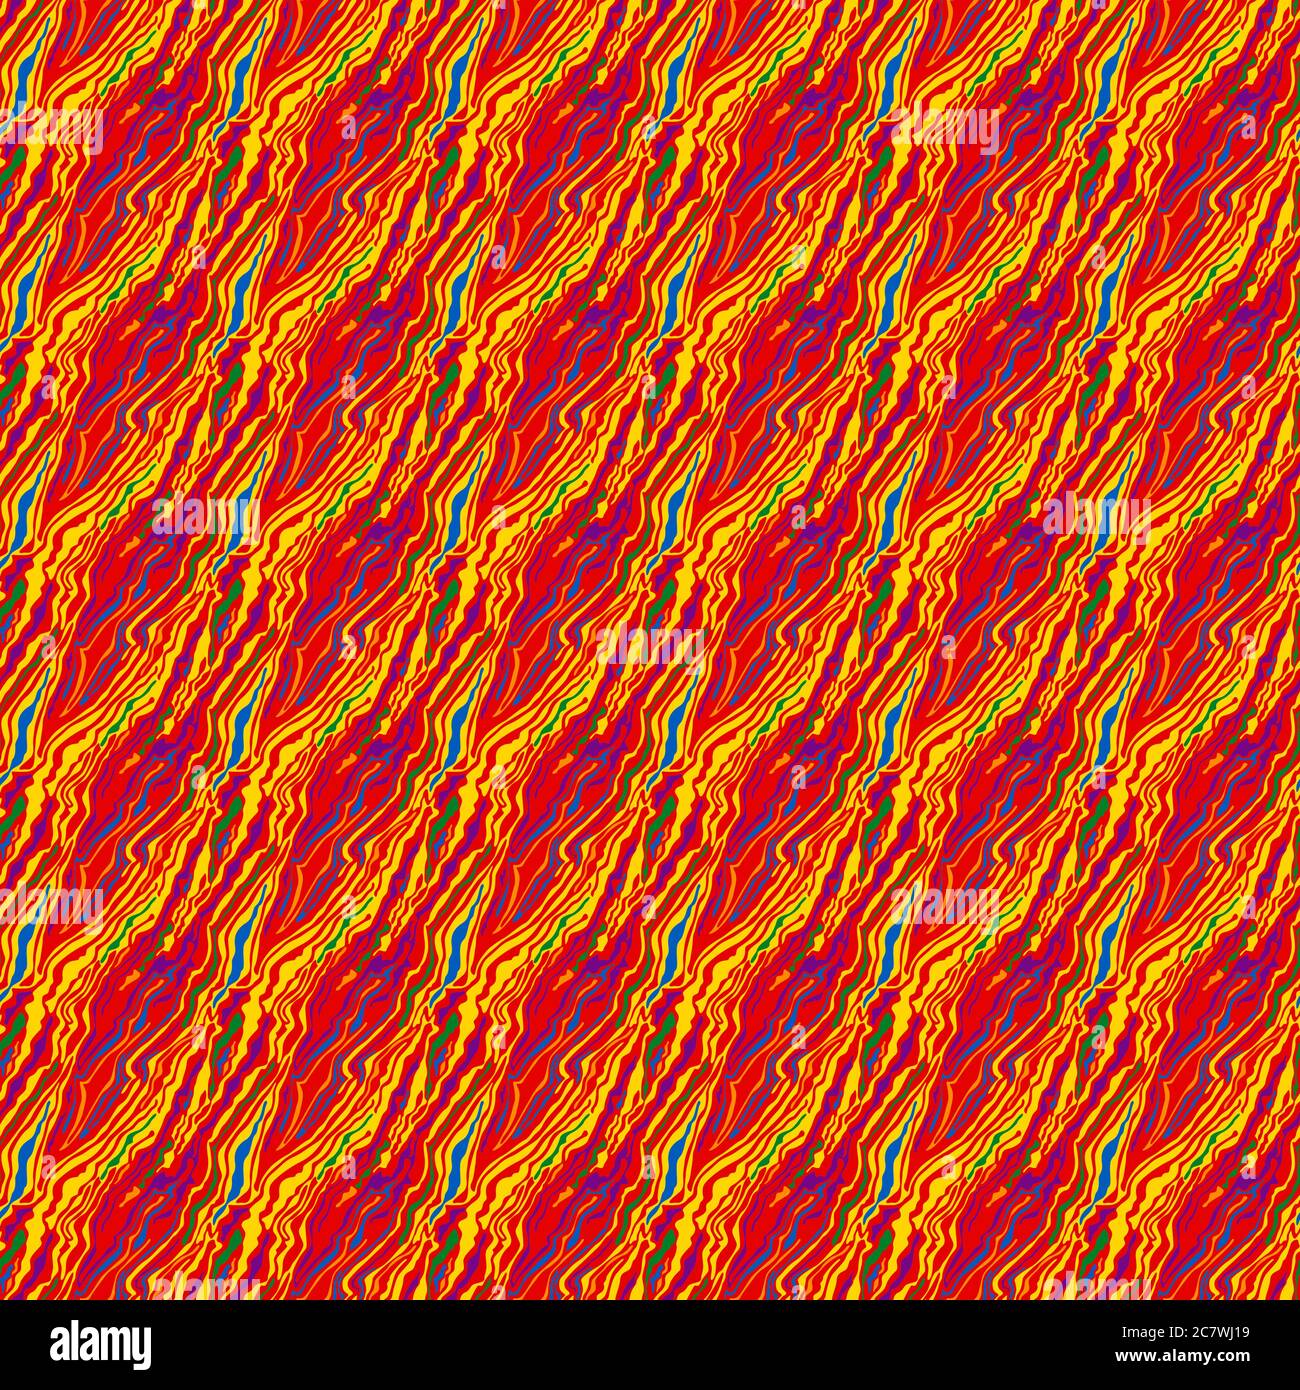 Contrast Seamless Pattern Of Randomly Chaotic Wavy Multicolor Shapes Hand Drawing Illustration